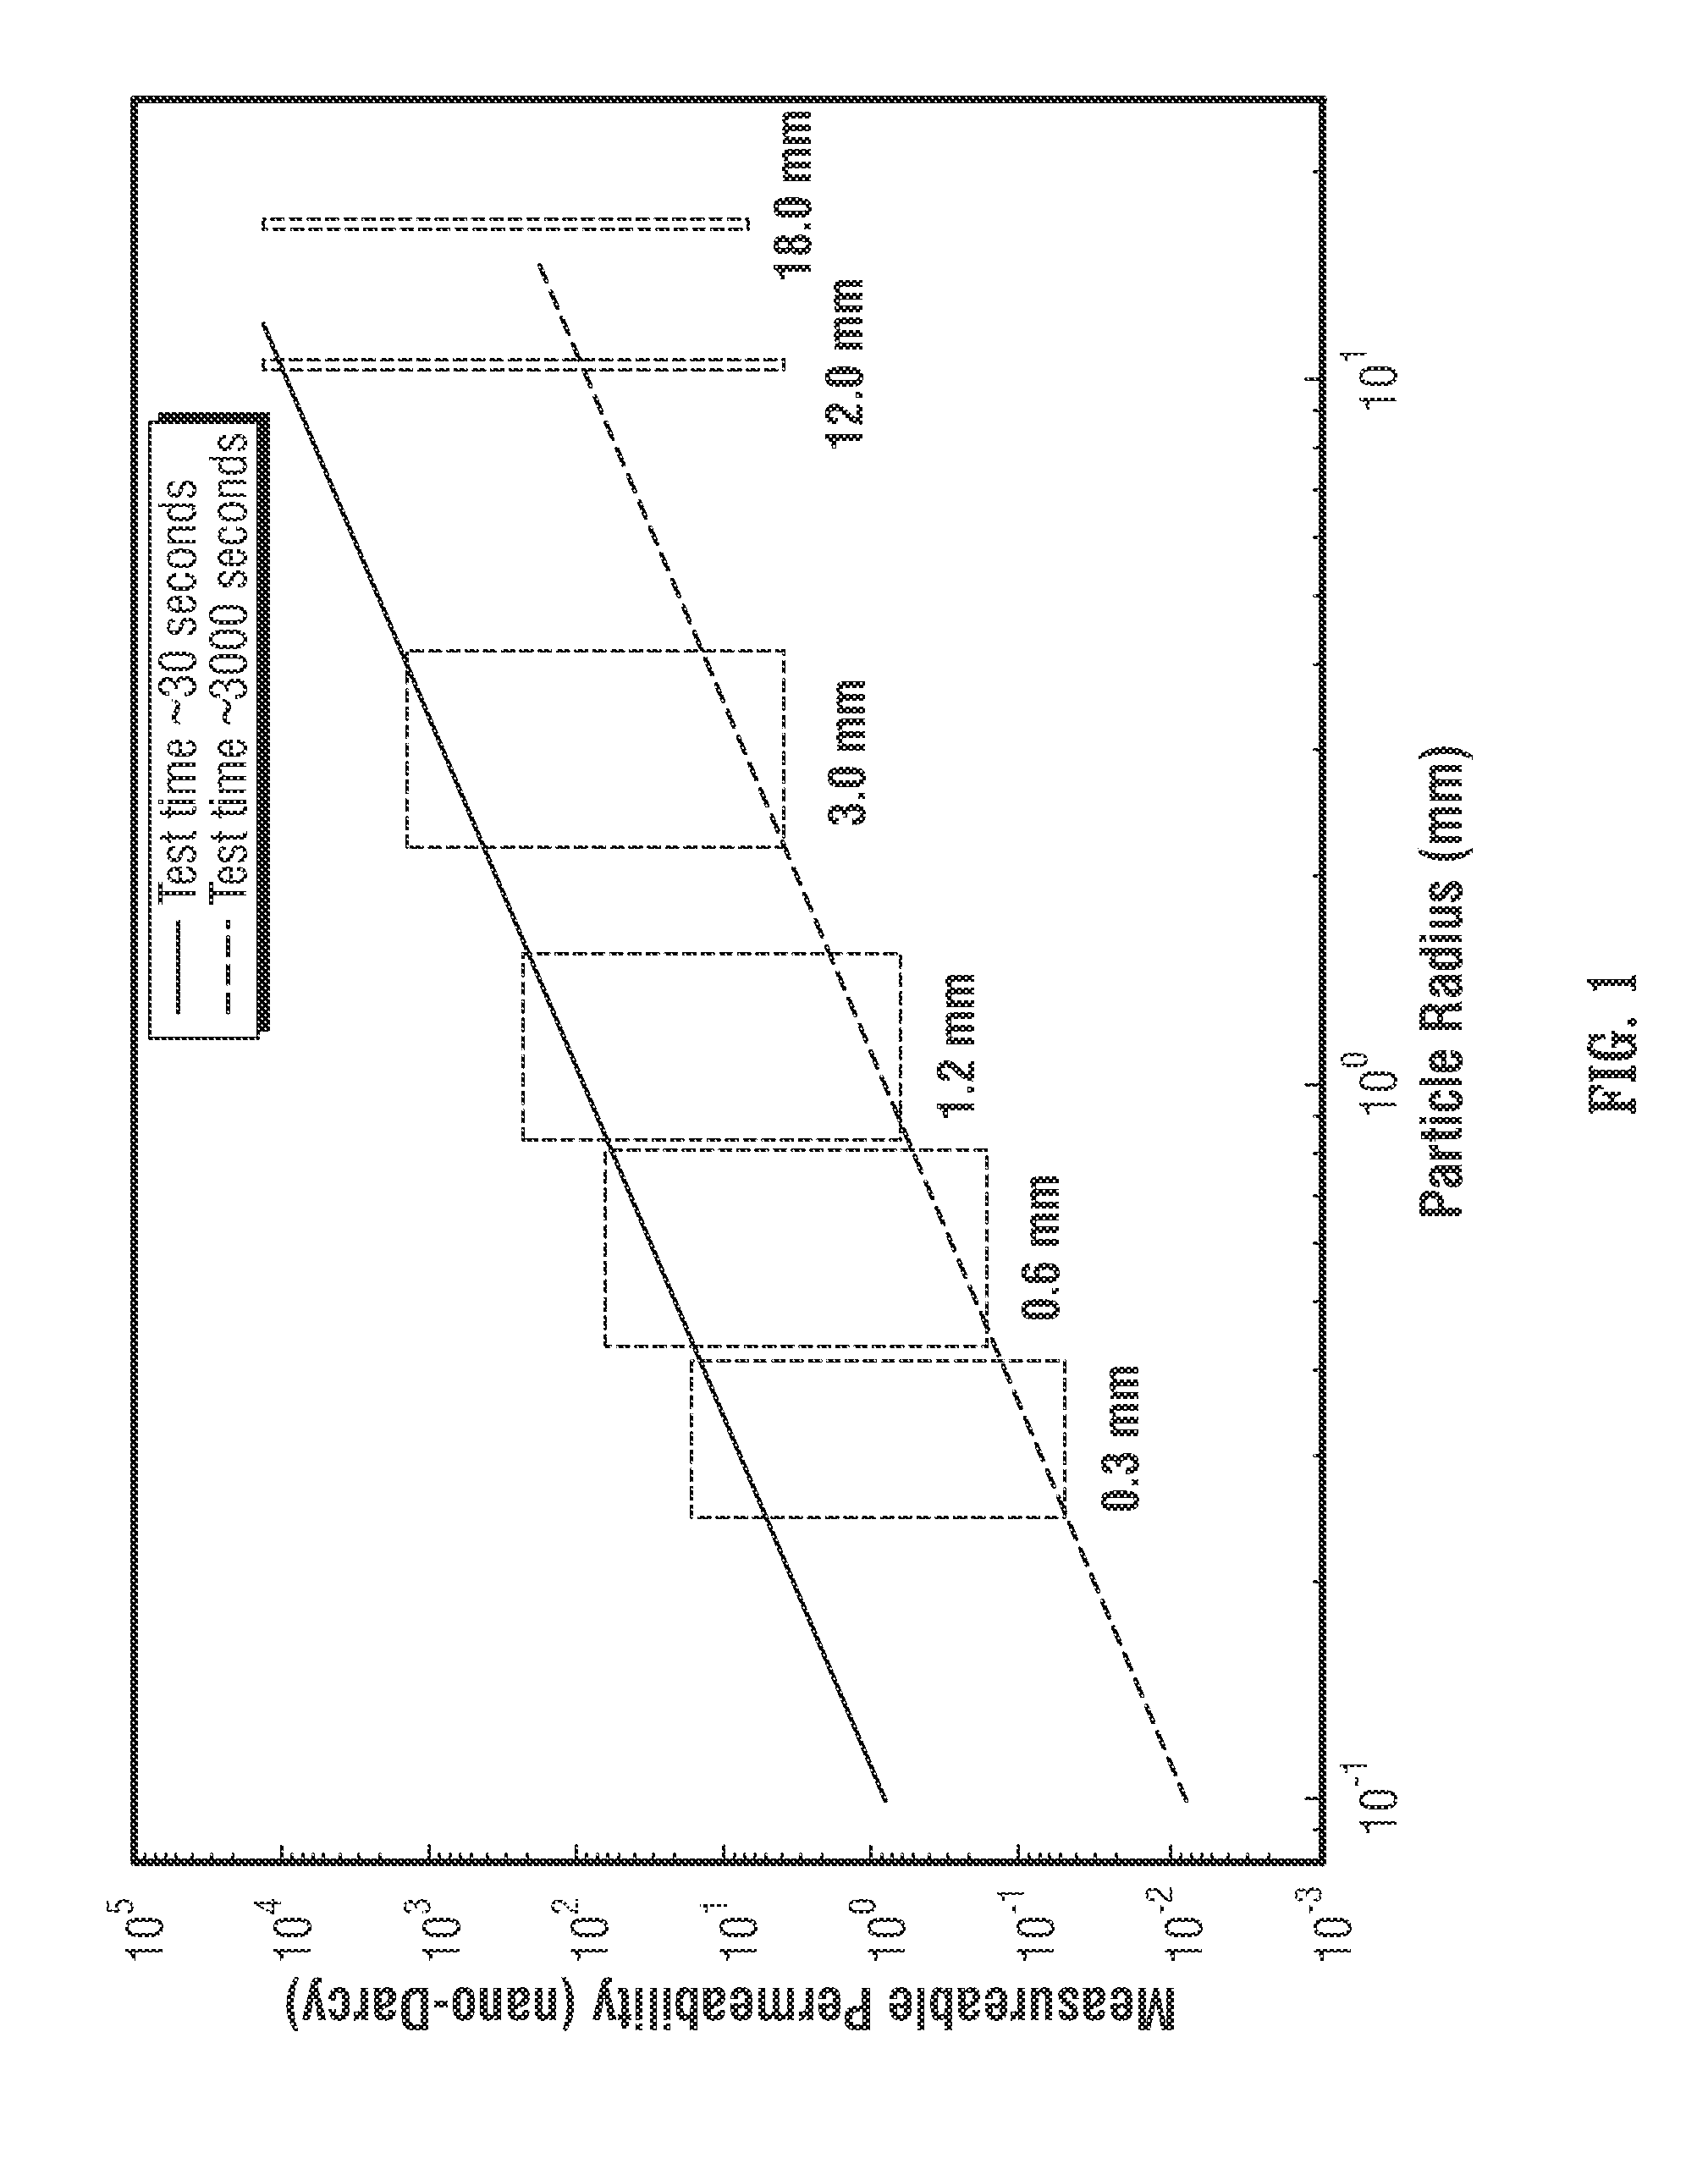 Apparatus and methodology for measuring properties of microporous material at multiple scales